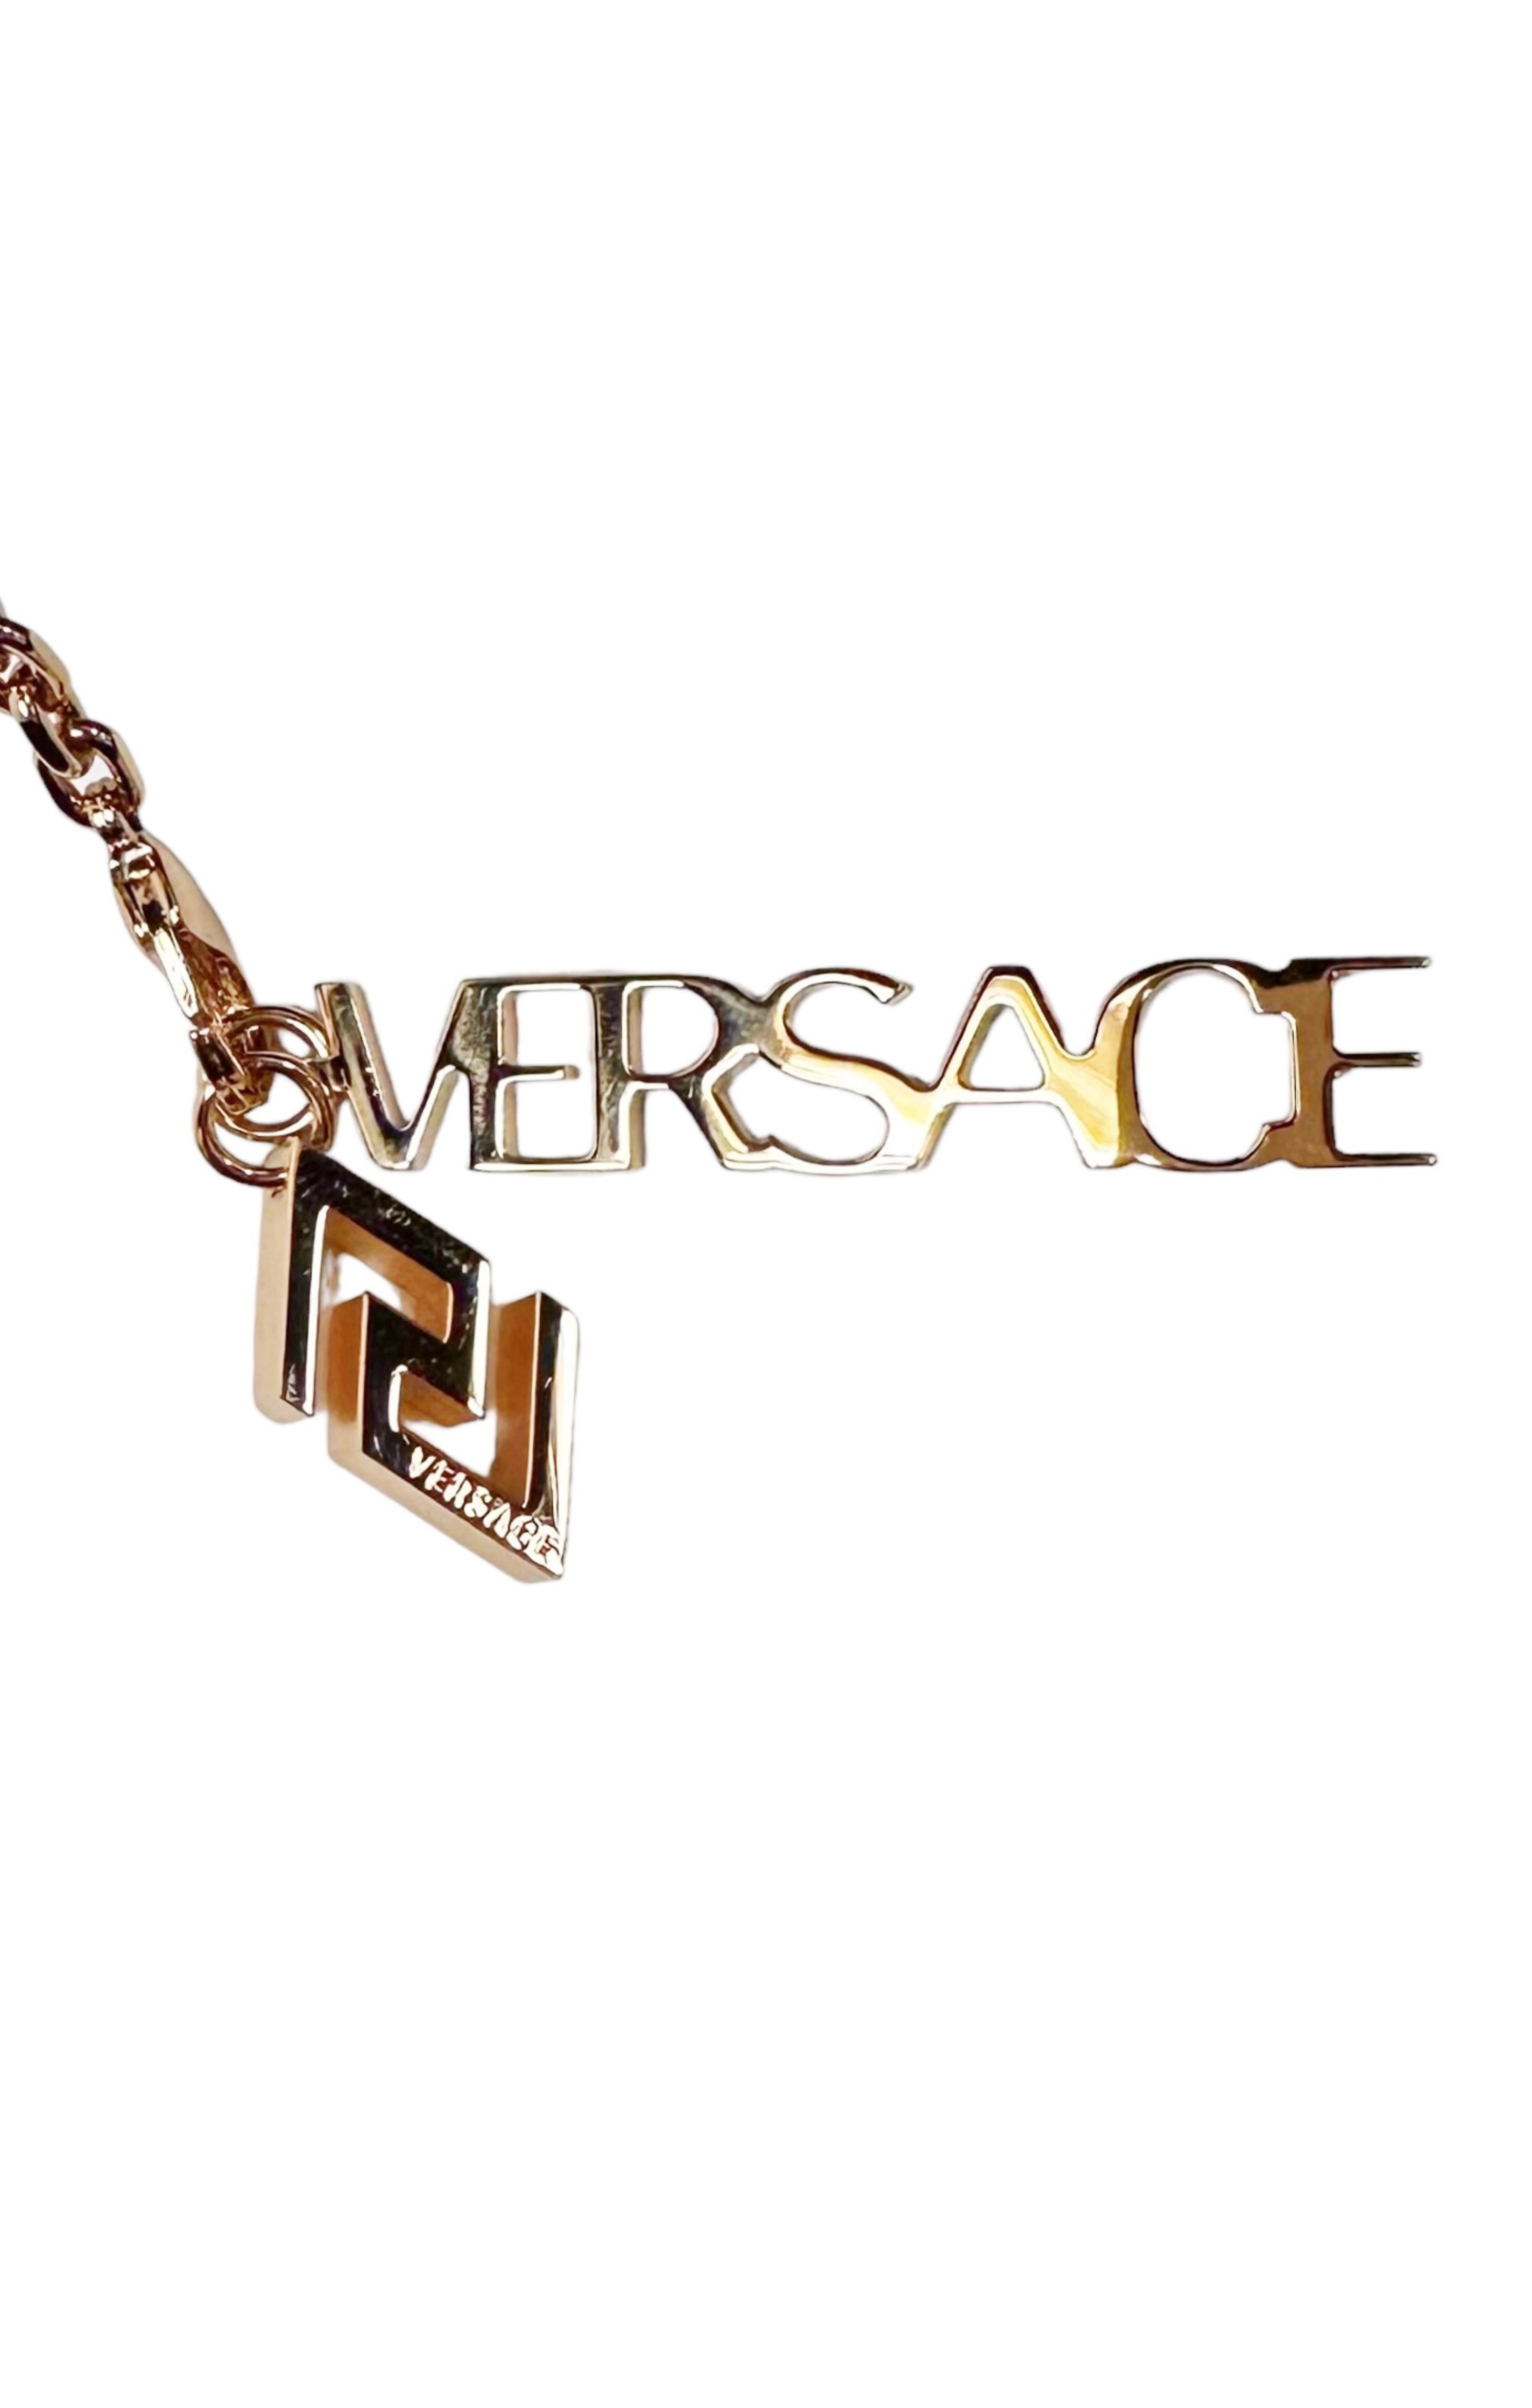 VERSACE (RARE & NEW) with tags Bag Size: 12.5" x 2.375" x 9.75"; 8.25" drop handle